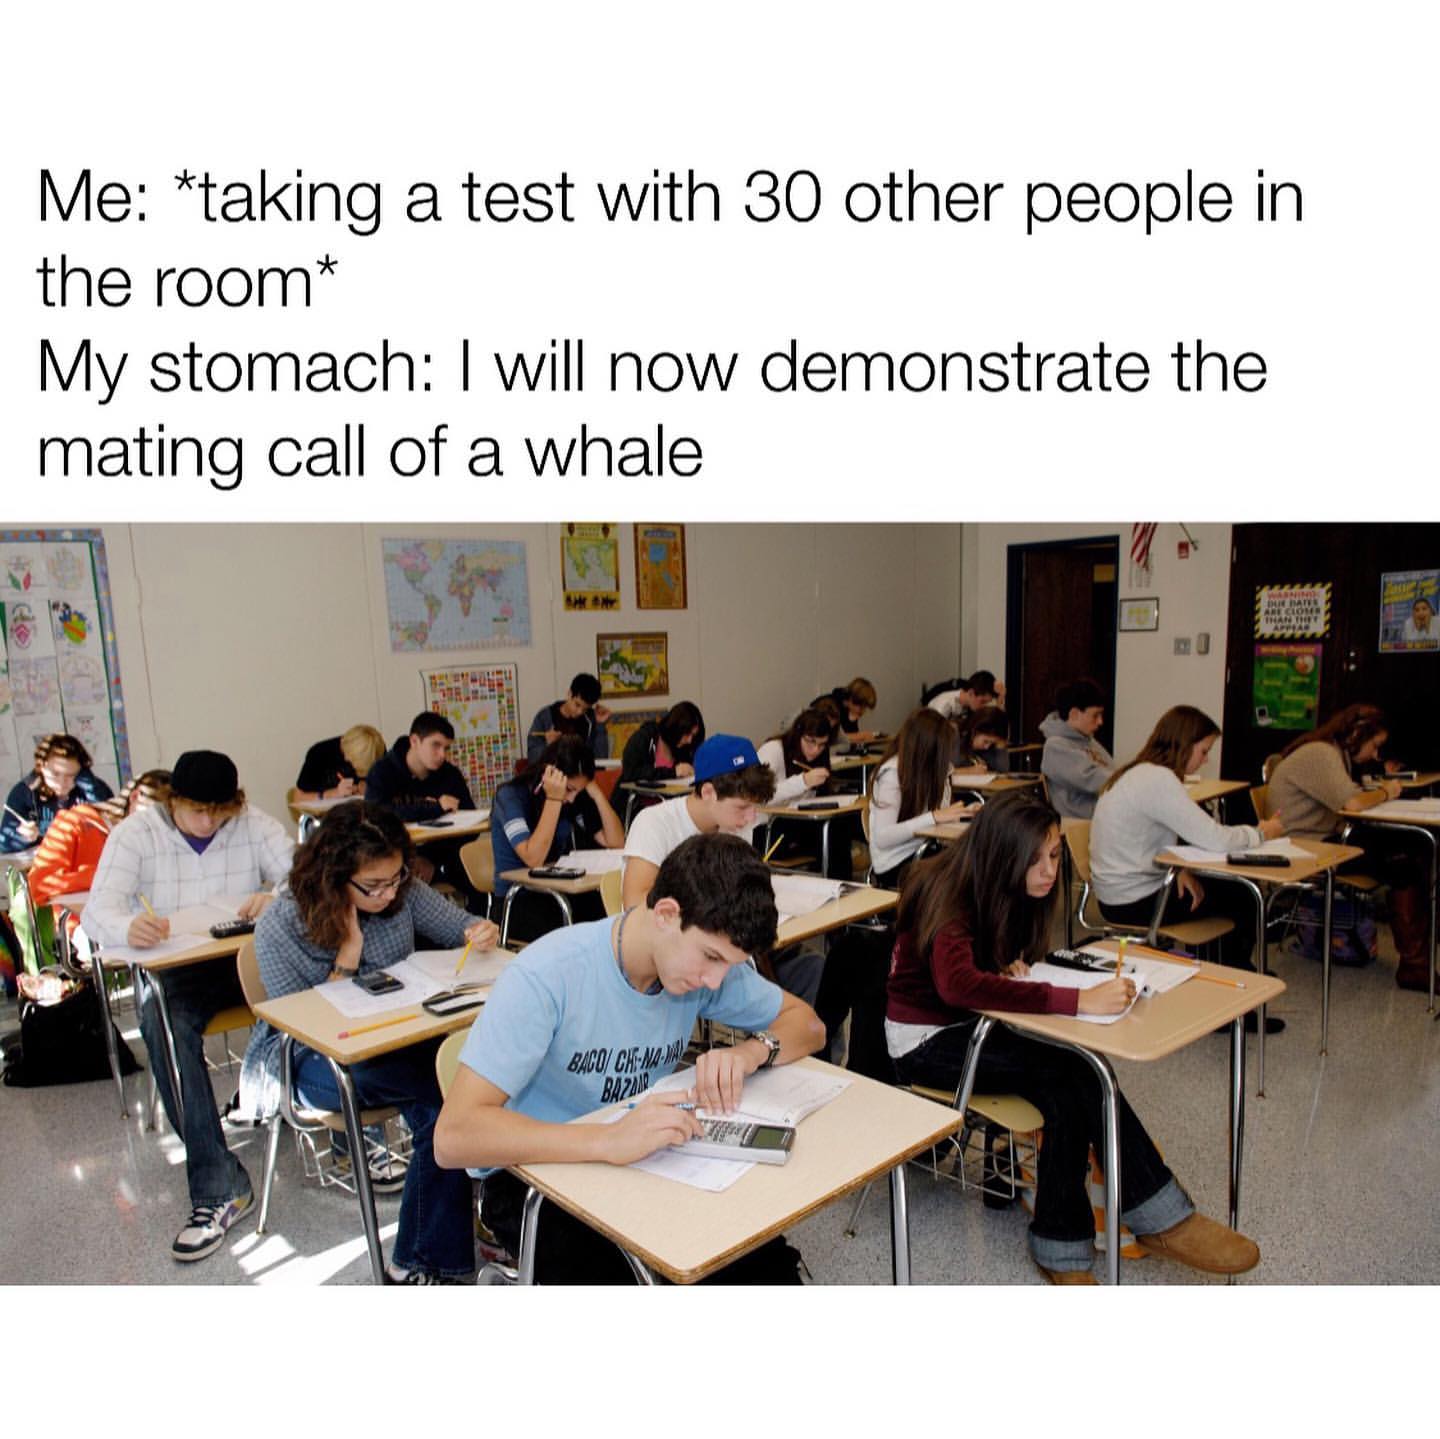 Me: *taking a test with 30 other people in the room*  My stomach: I will now demonstrate the mating call of a whale.